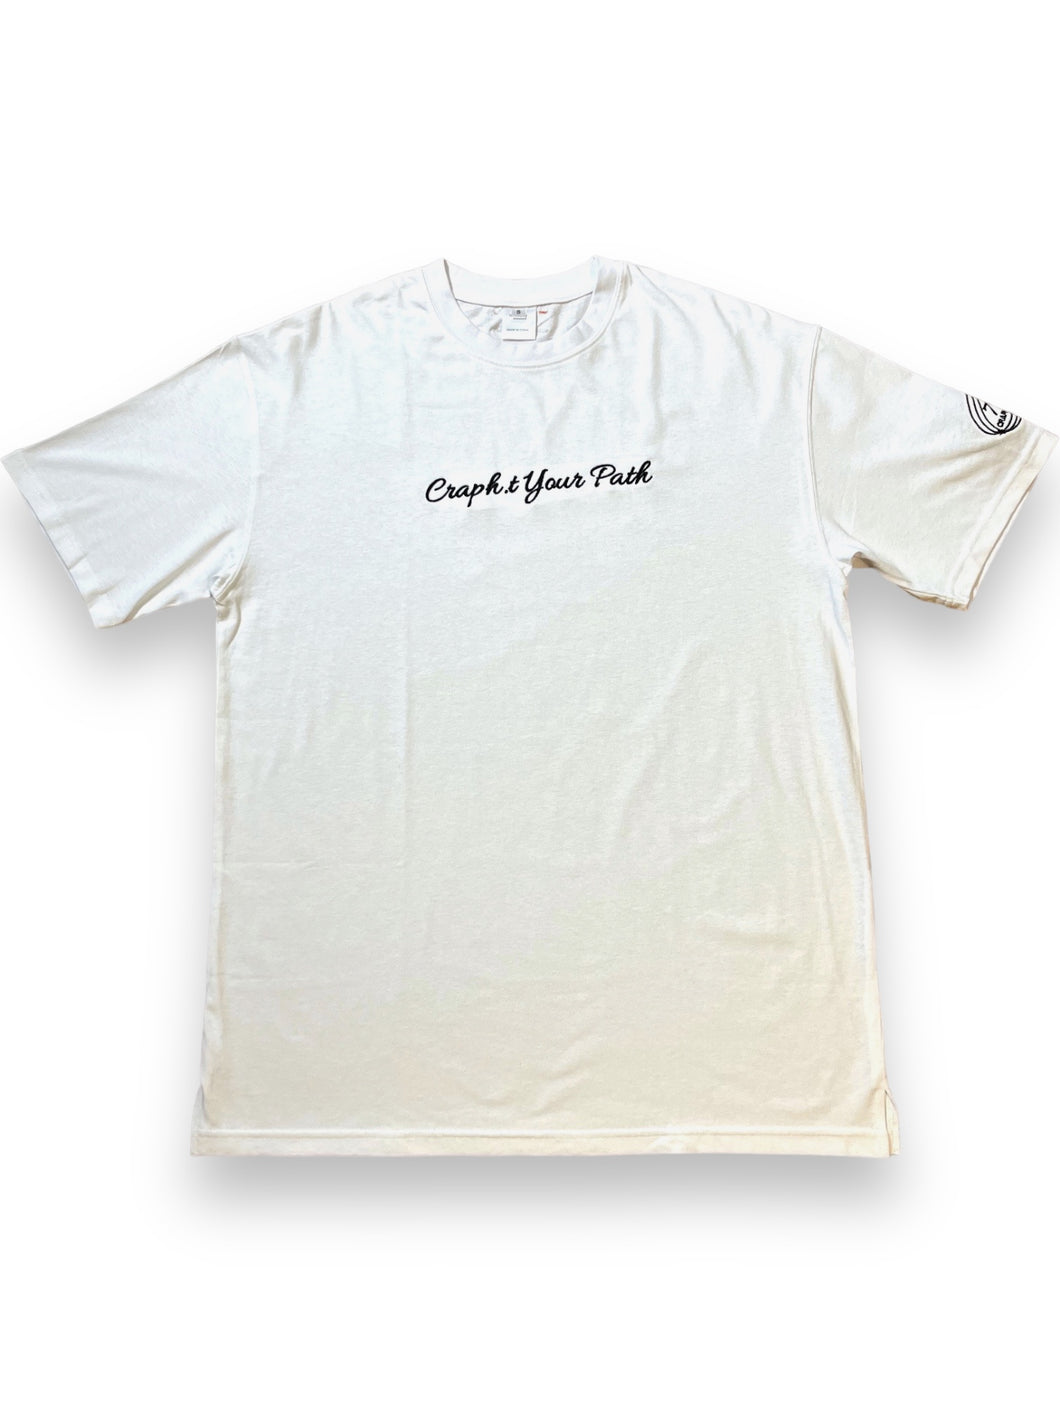 CRAPHT YOUR PATH T-Shirt (White)